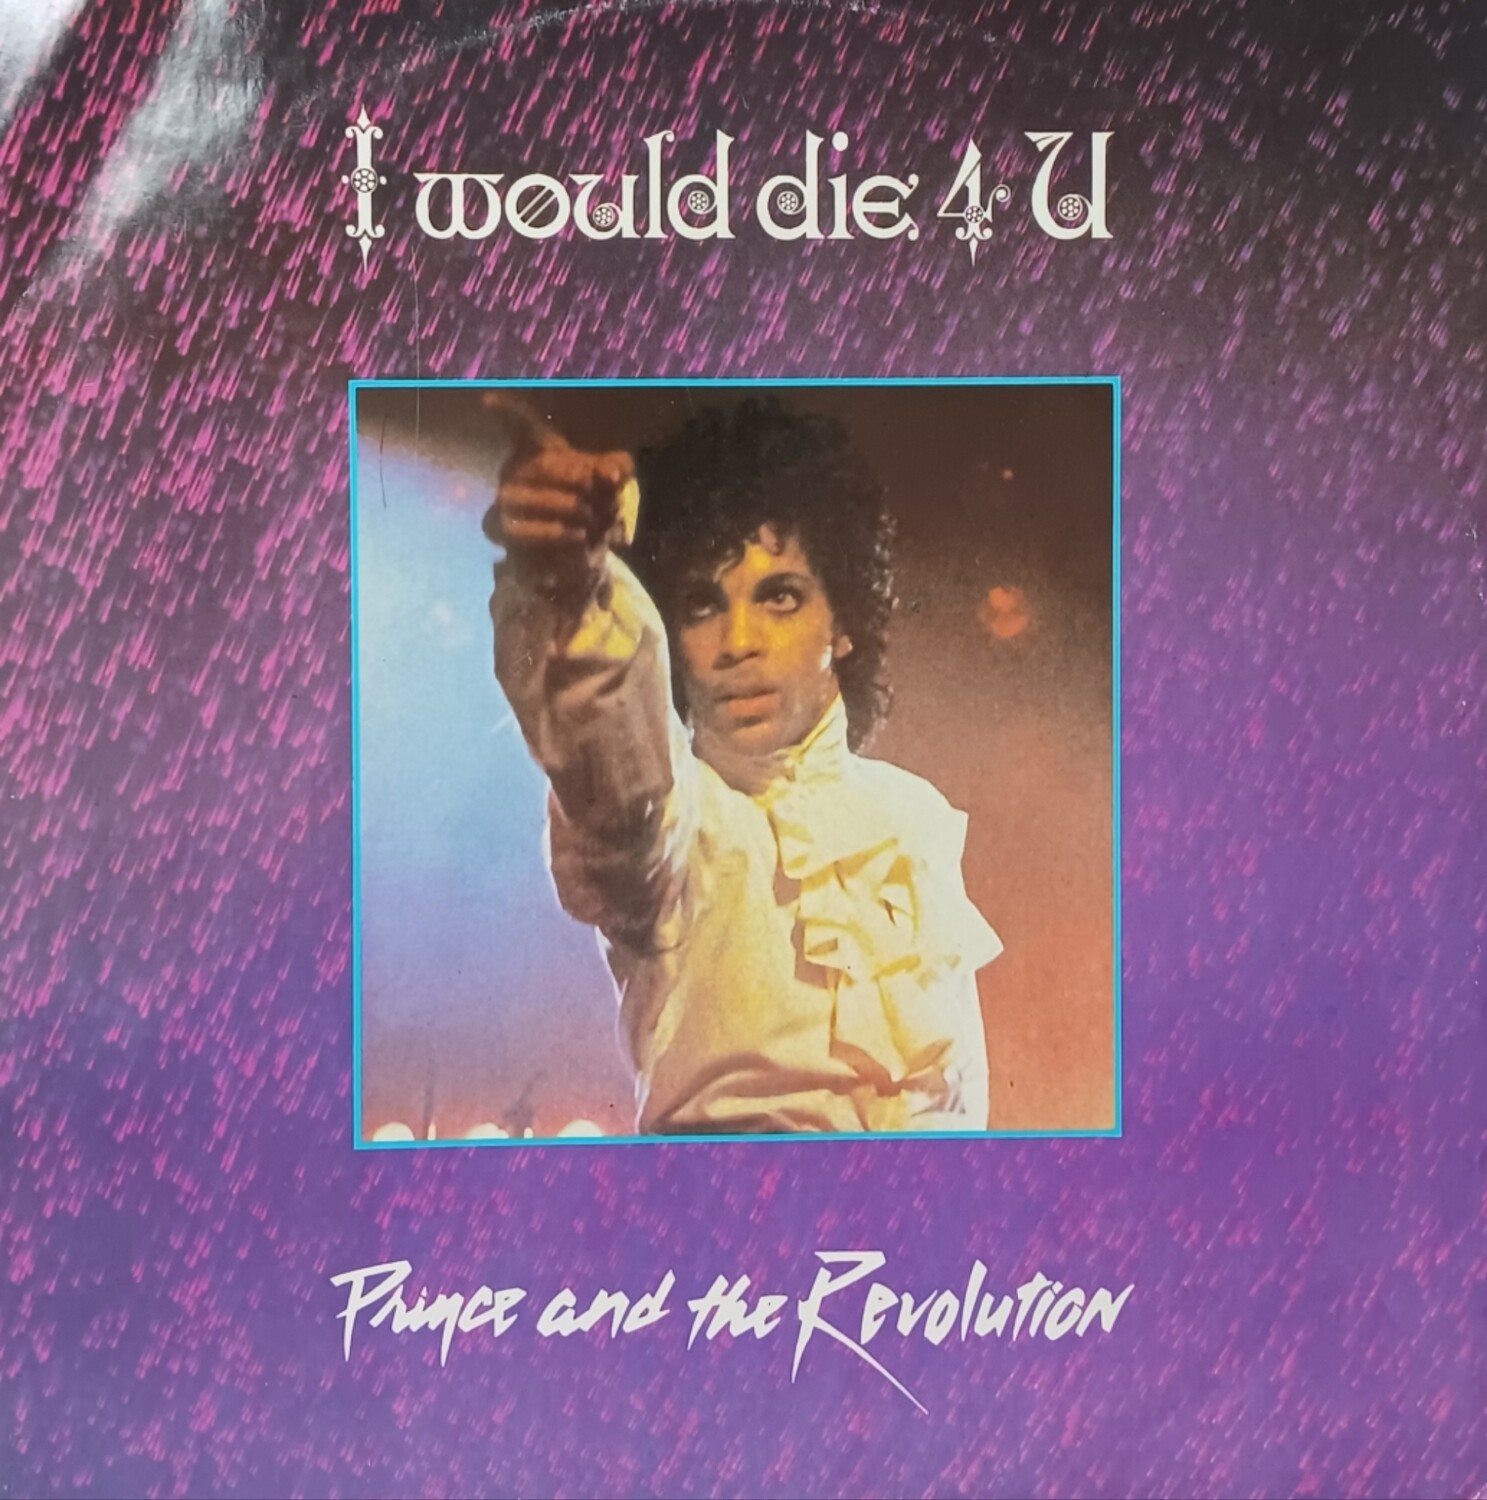 Prince - I would die for you (MAXI)